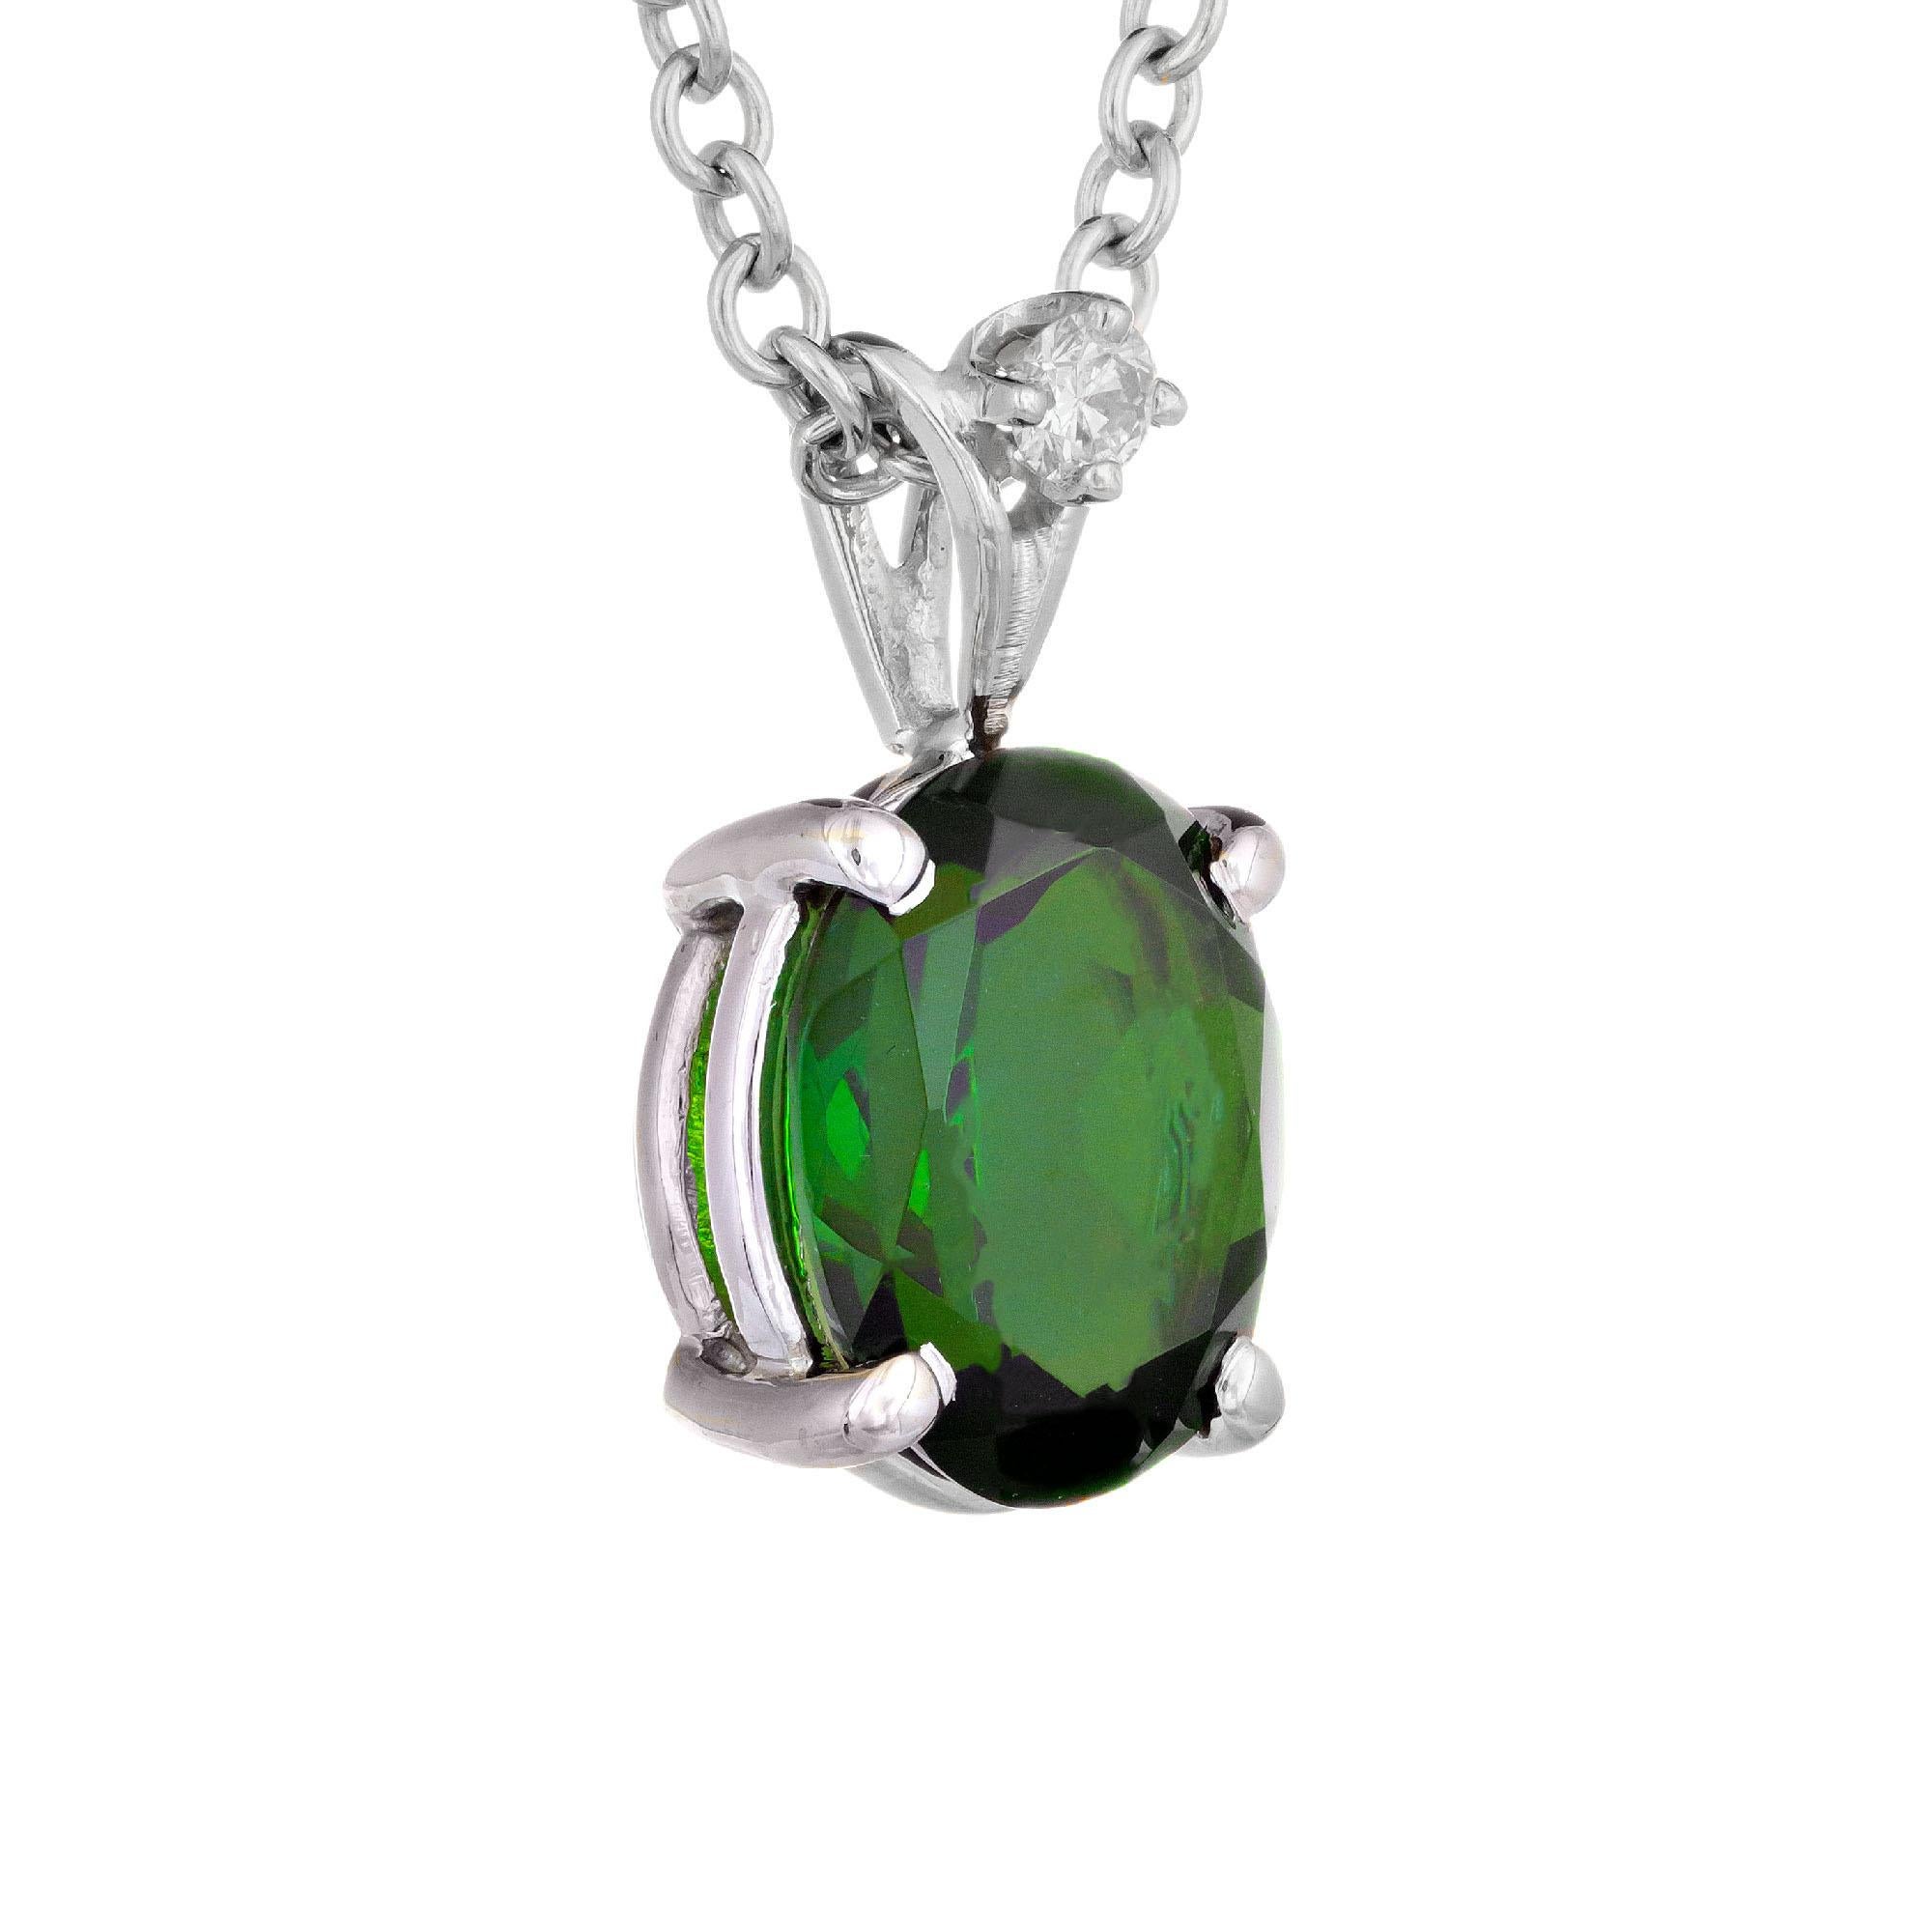 Green tourmaline diamond pendant necklace. Oval center stone with 1 round accent diamond in 14k white gold. 19 inch chain.  

1 oval green tourmaline, SI approx. 2.05ct
1 brilliant round cut diamond, G SI approx. .4ct
14k white gold 
Stamped: